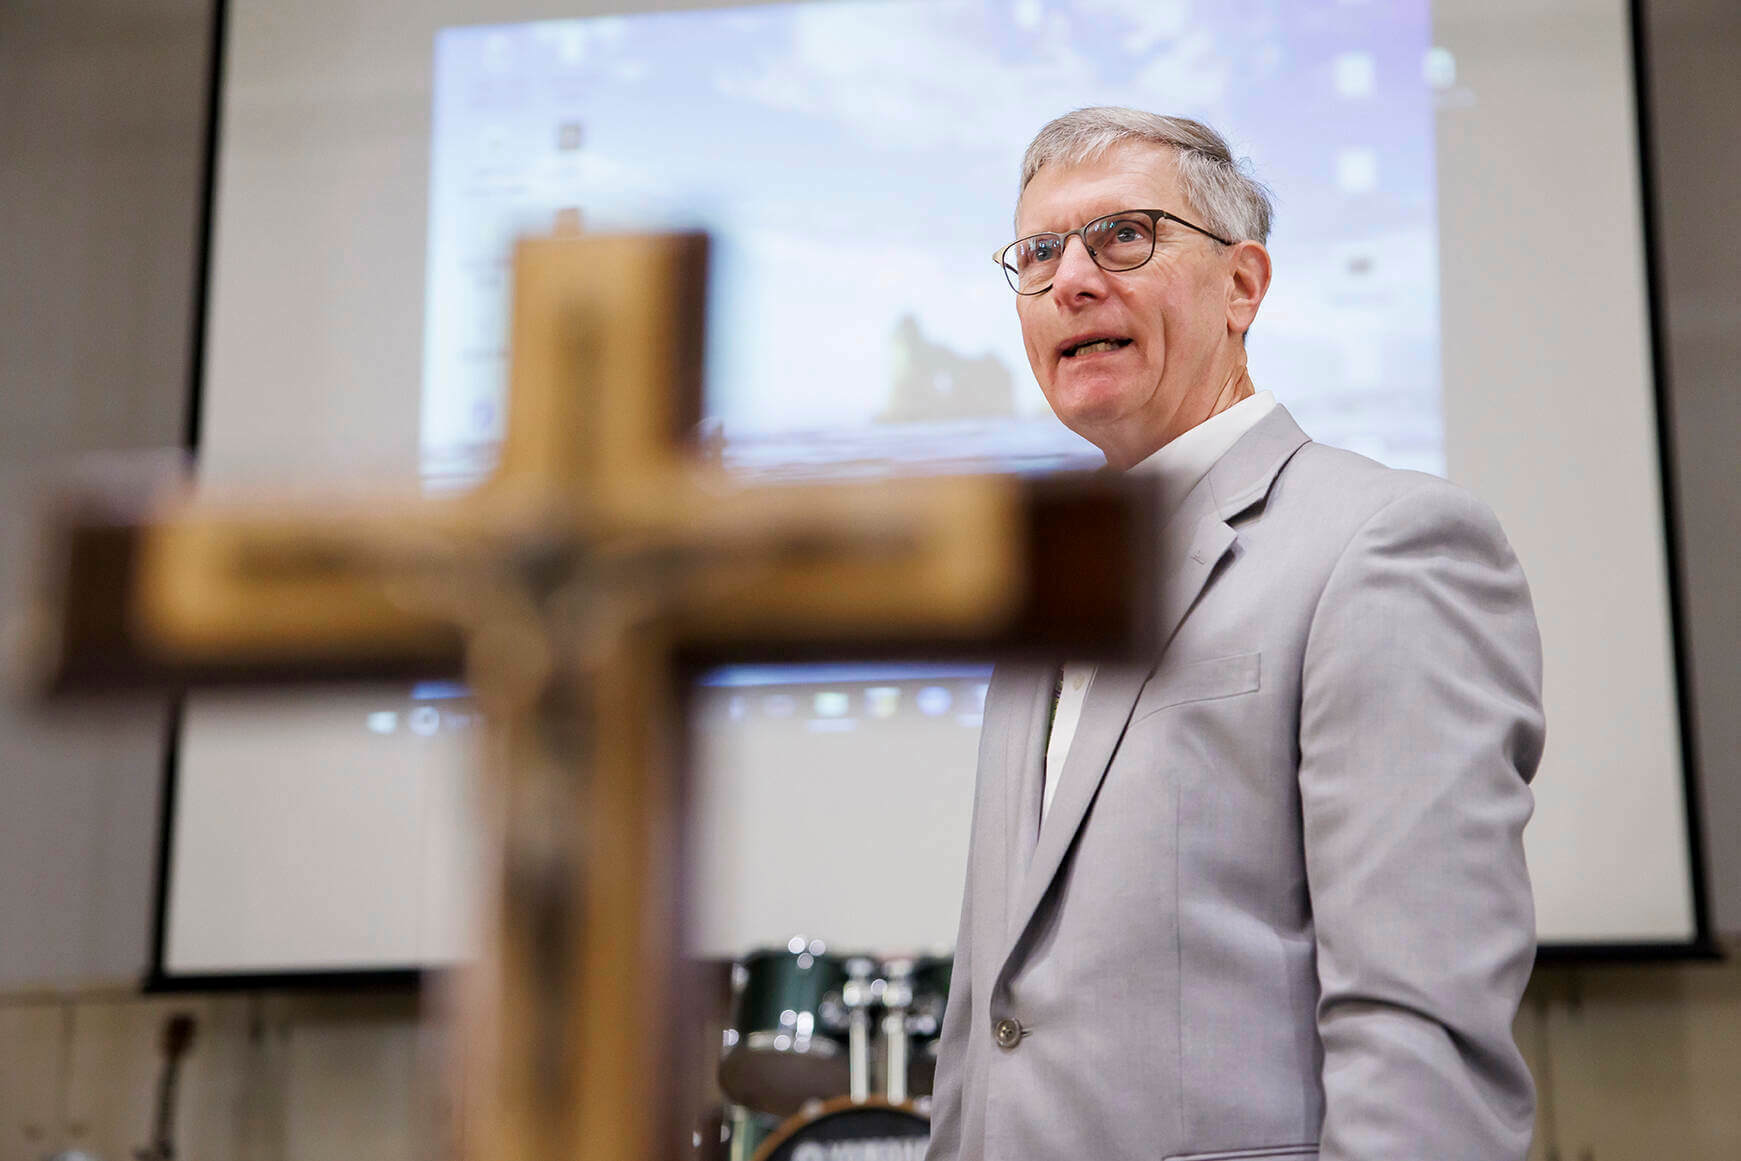 Deacon John Cord speaks with an image on a screen behind him and a cross in the foreground